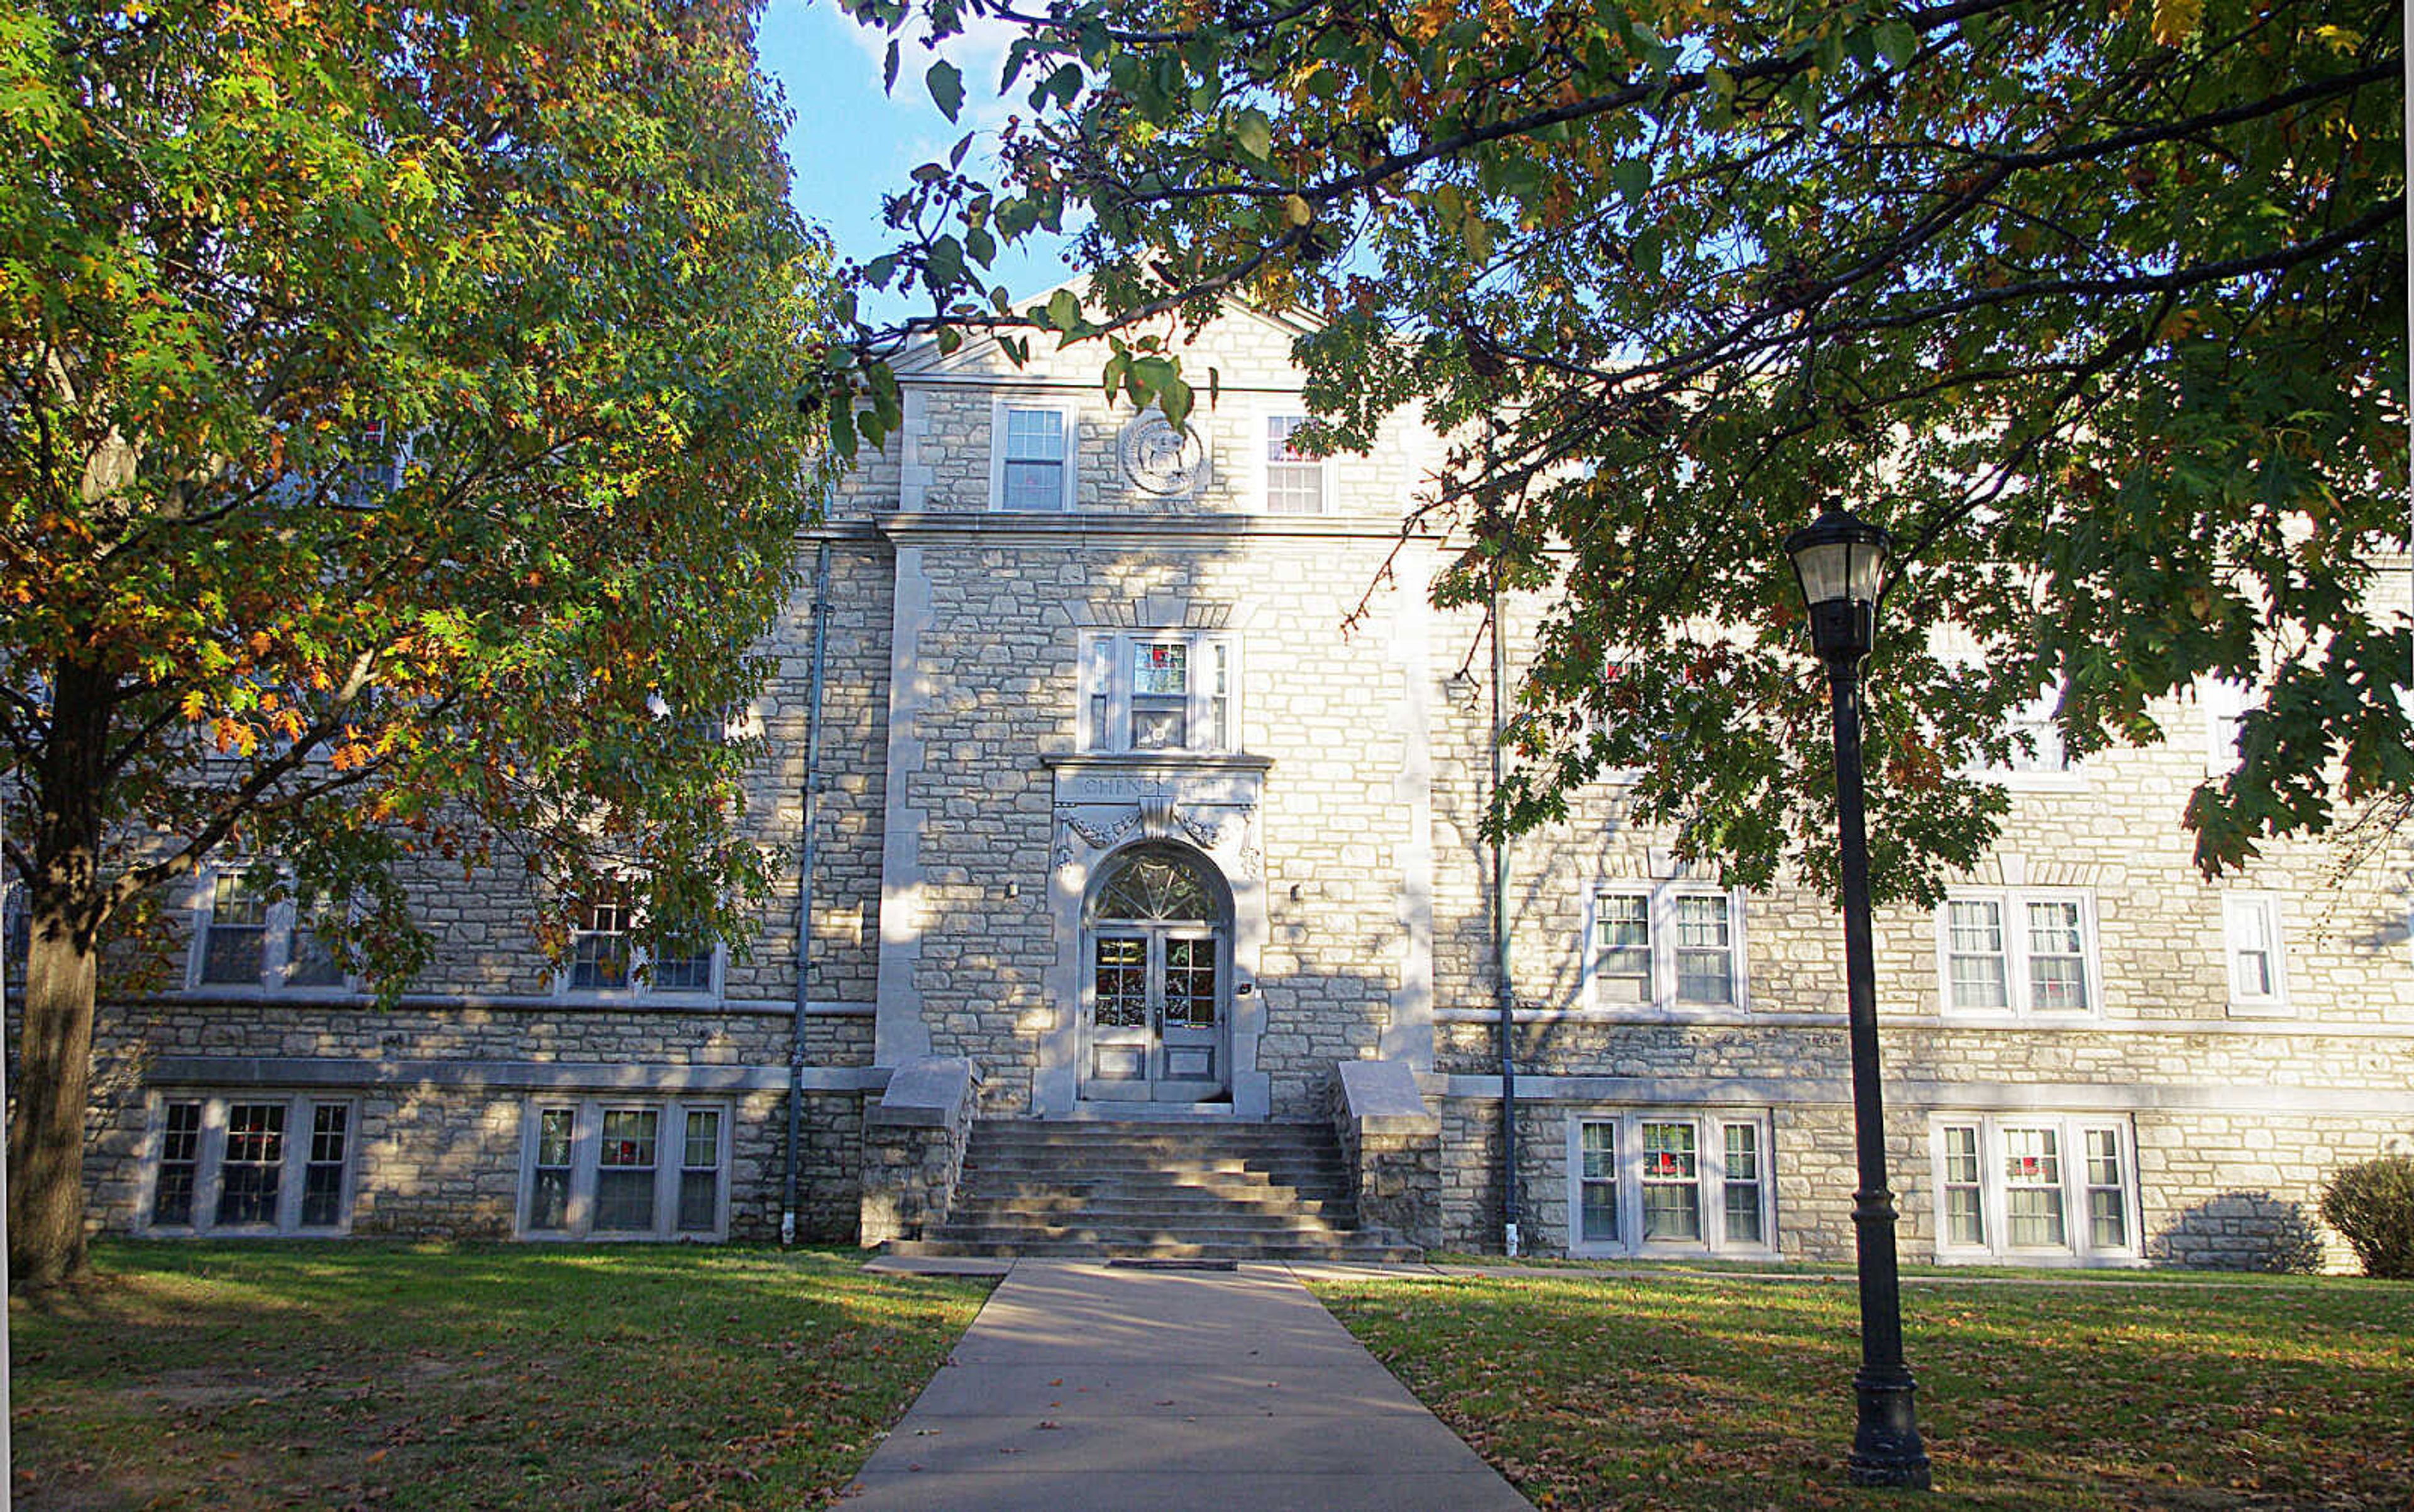 Cheney Hall is rumored to be haunted by a girl who committed suicide in her bathtub. Photo by Nathan Hamilton